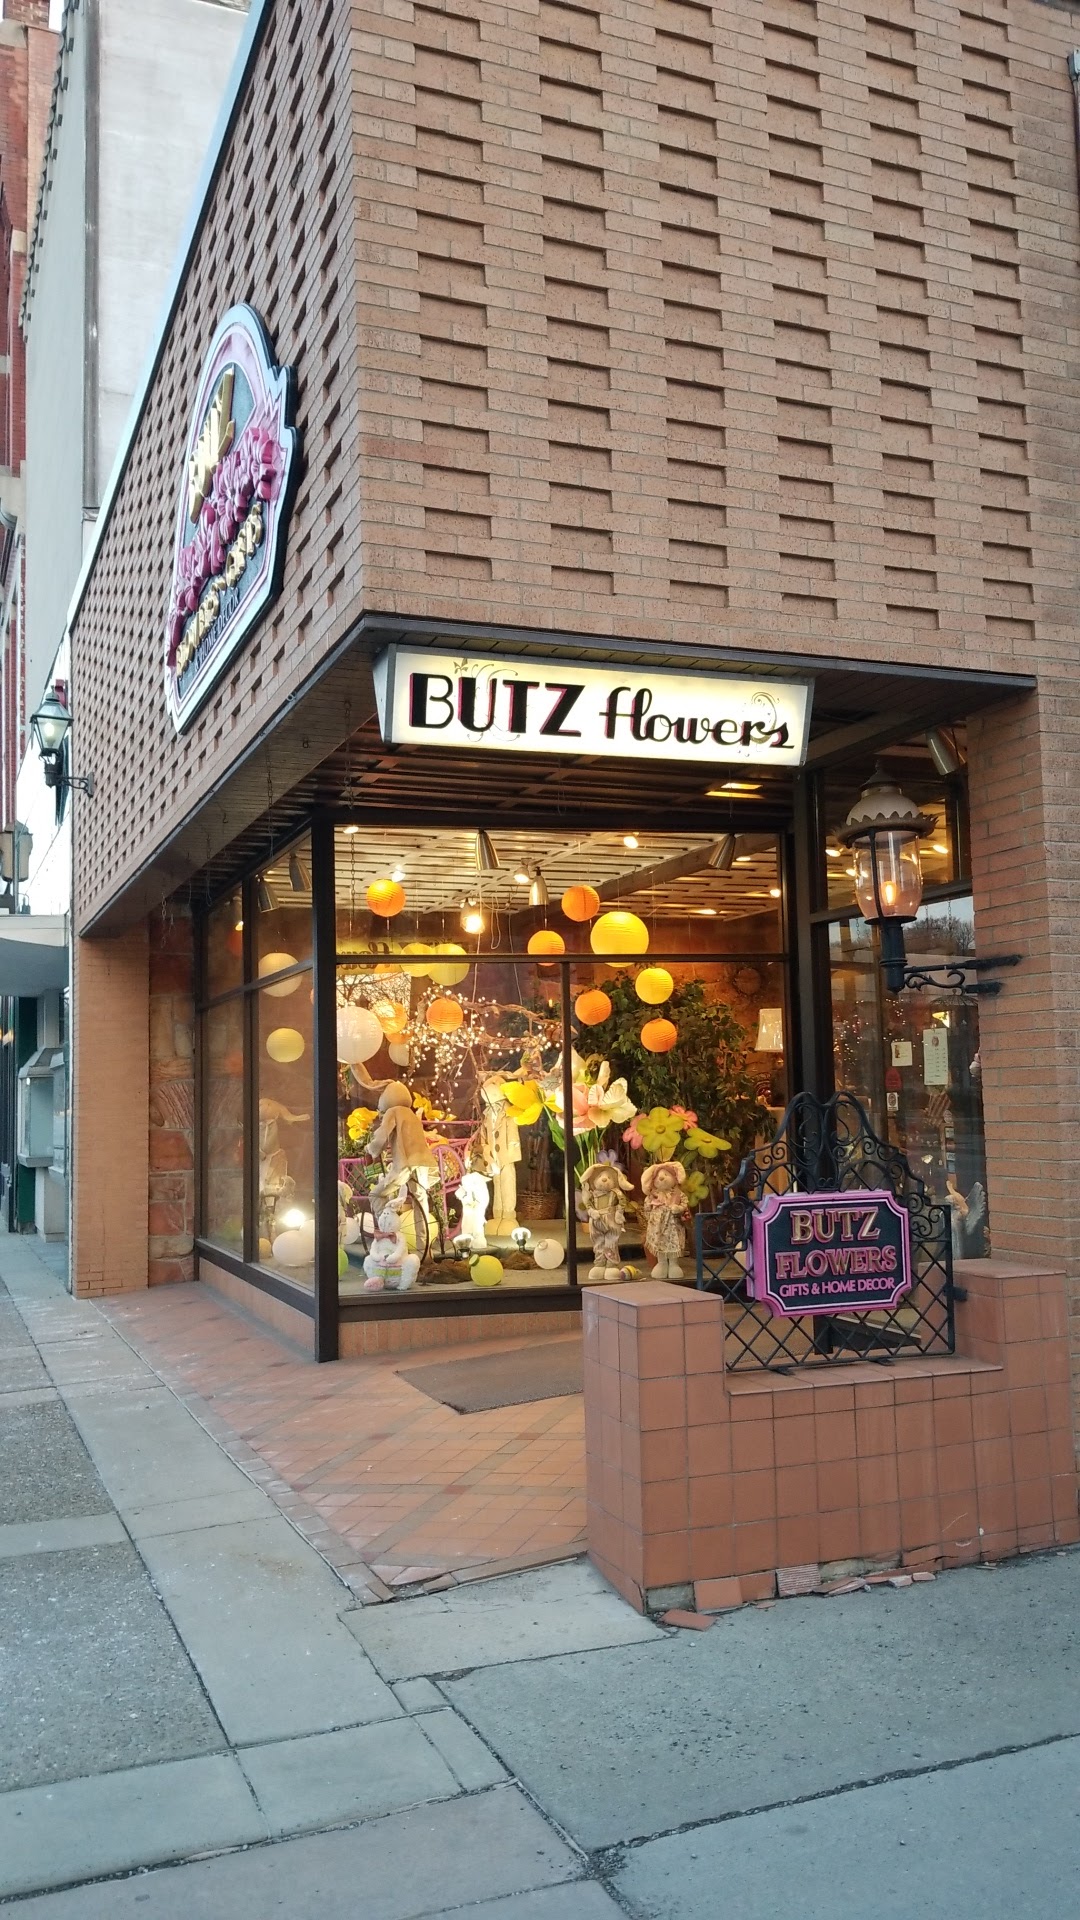 Butz Flowers & Gifts